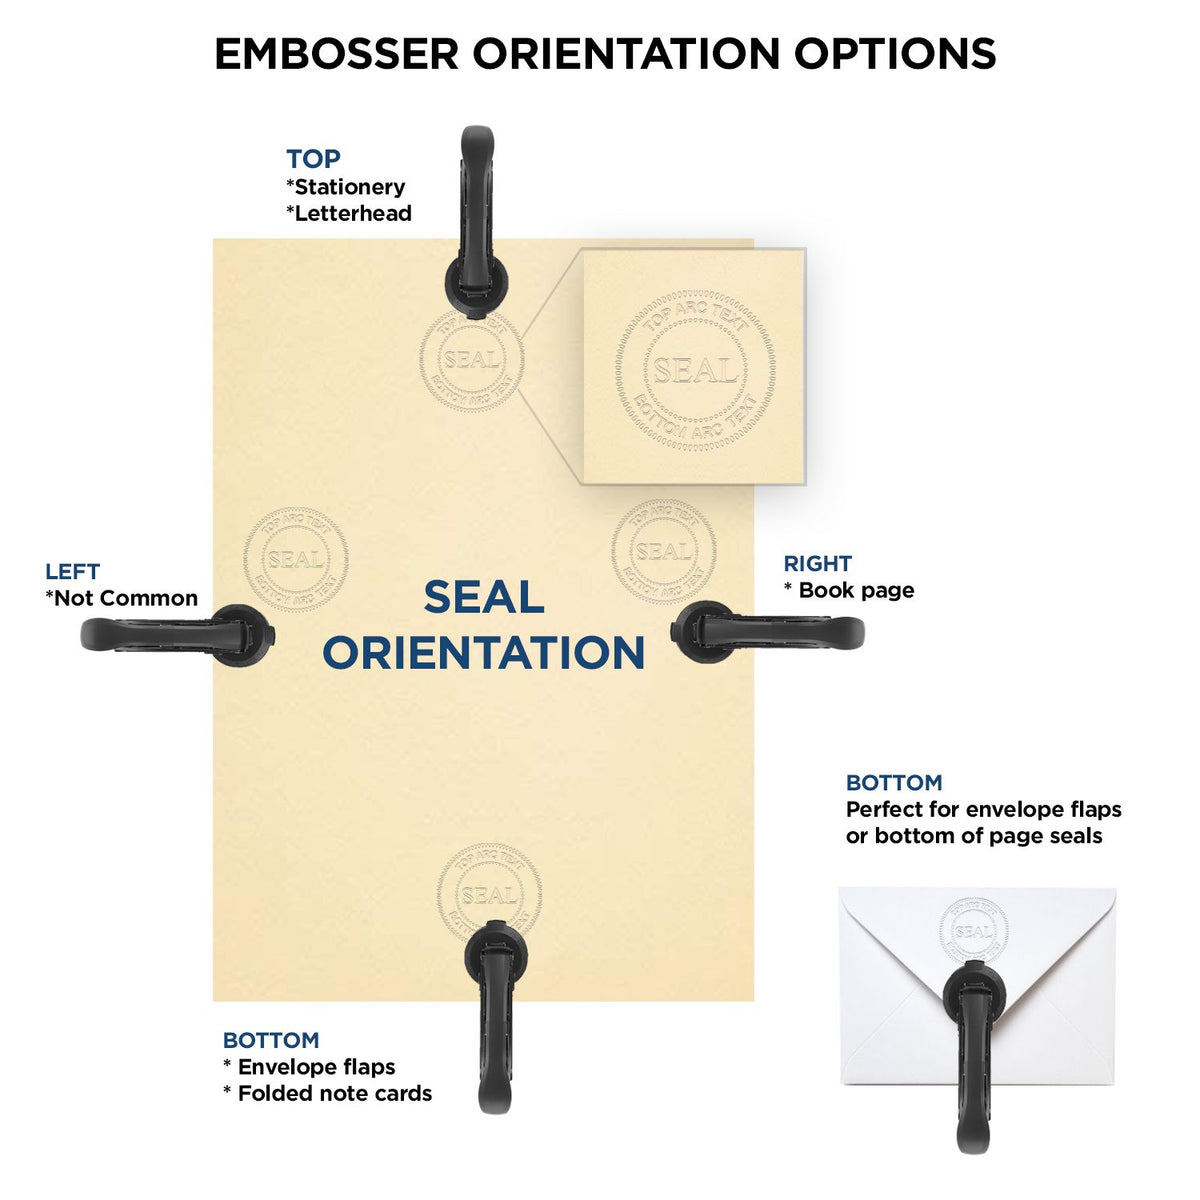 An infographic for the Georgia Geologist Desk Seal showing embosser orientation, this is showing examples of a top, bottom, right and left insert.